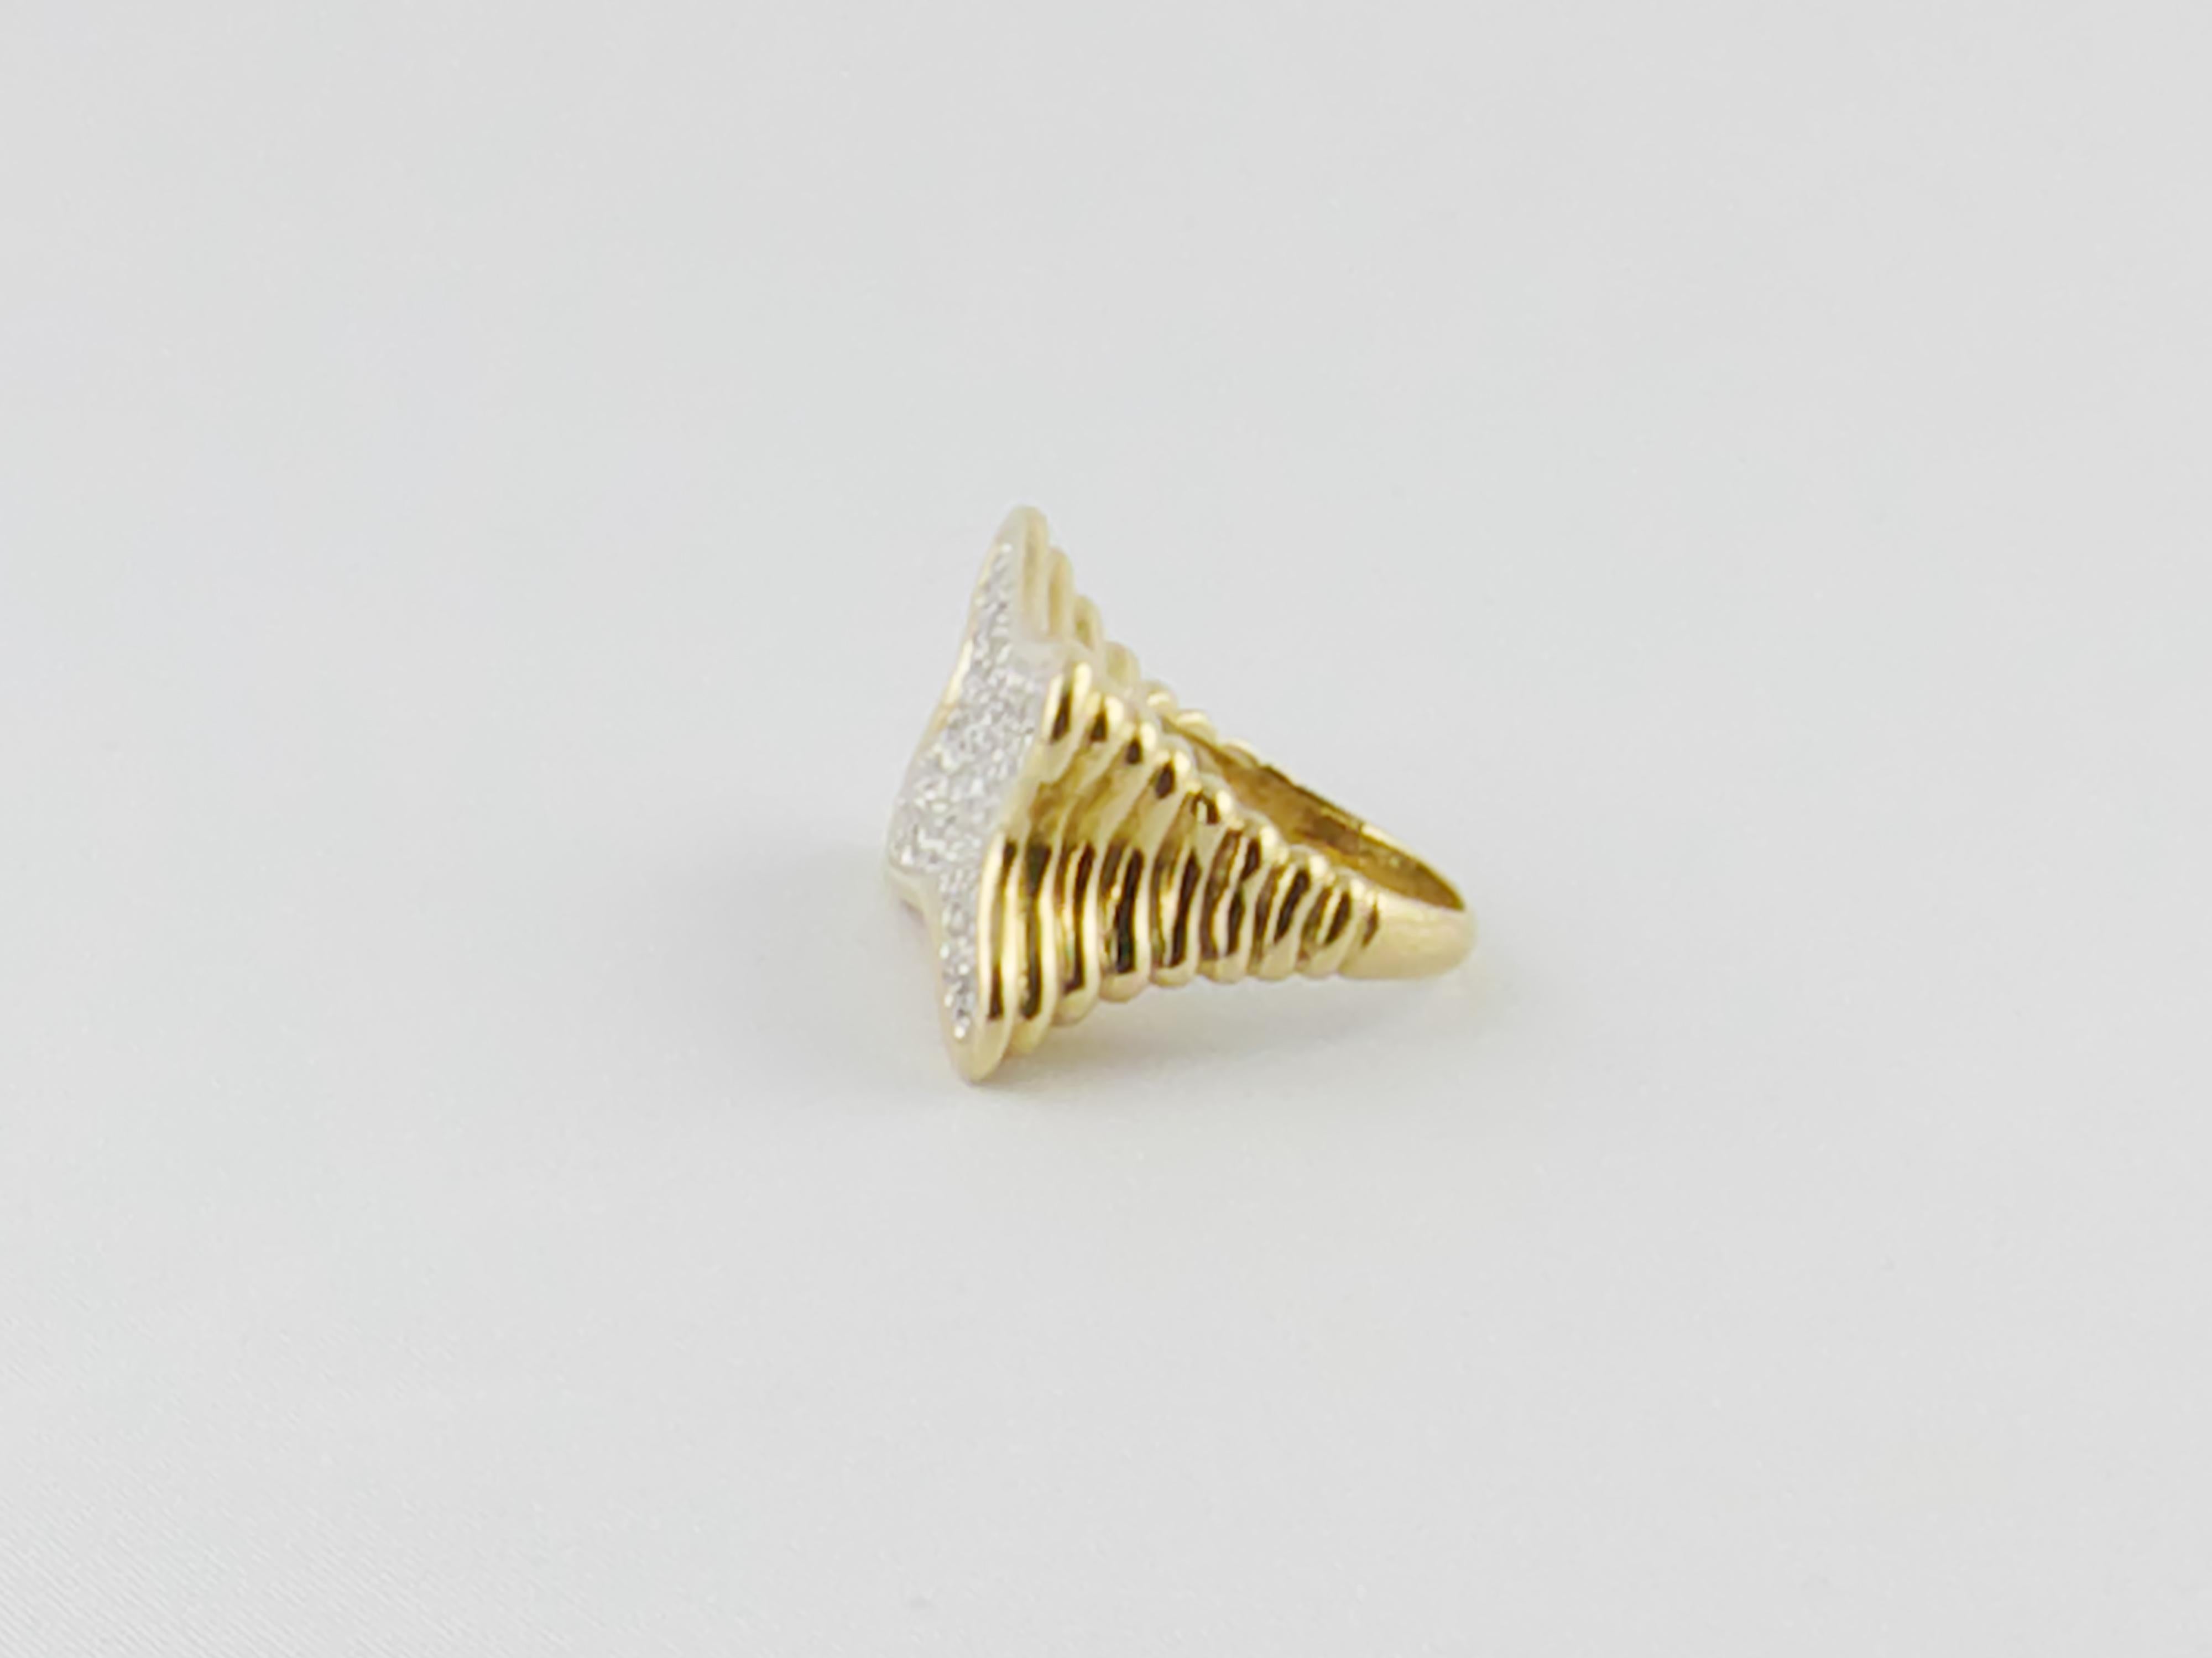 This distintive and imposing 1970s 18 karat Yellow Gold free-form ring with approx 1.30 carat Diamond pavé has a fluted shank exquisitely designed and crafted.
Modern and intriguing this ring has  a sophisticated and glamourous look.
Size 6 1/4 -